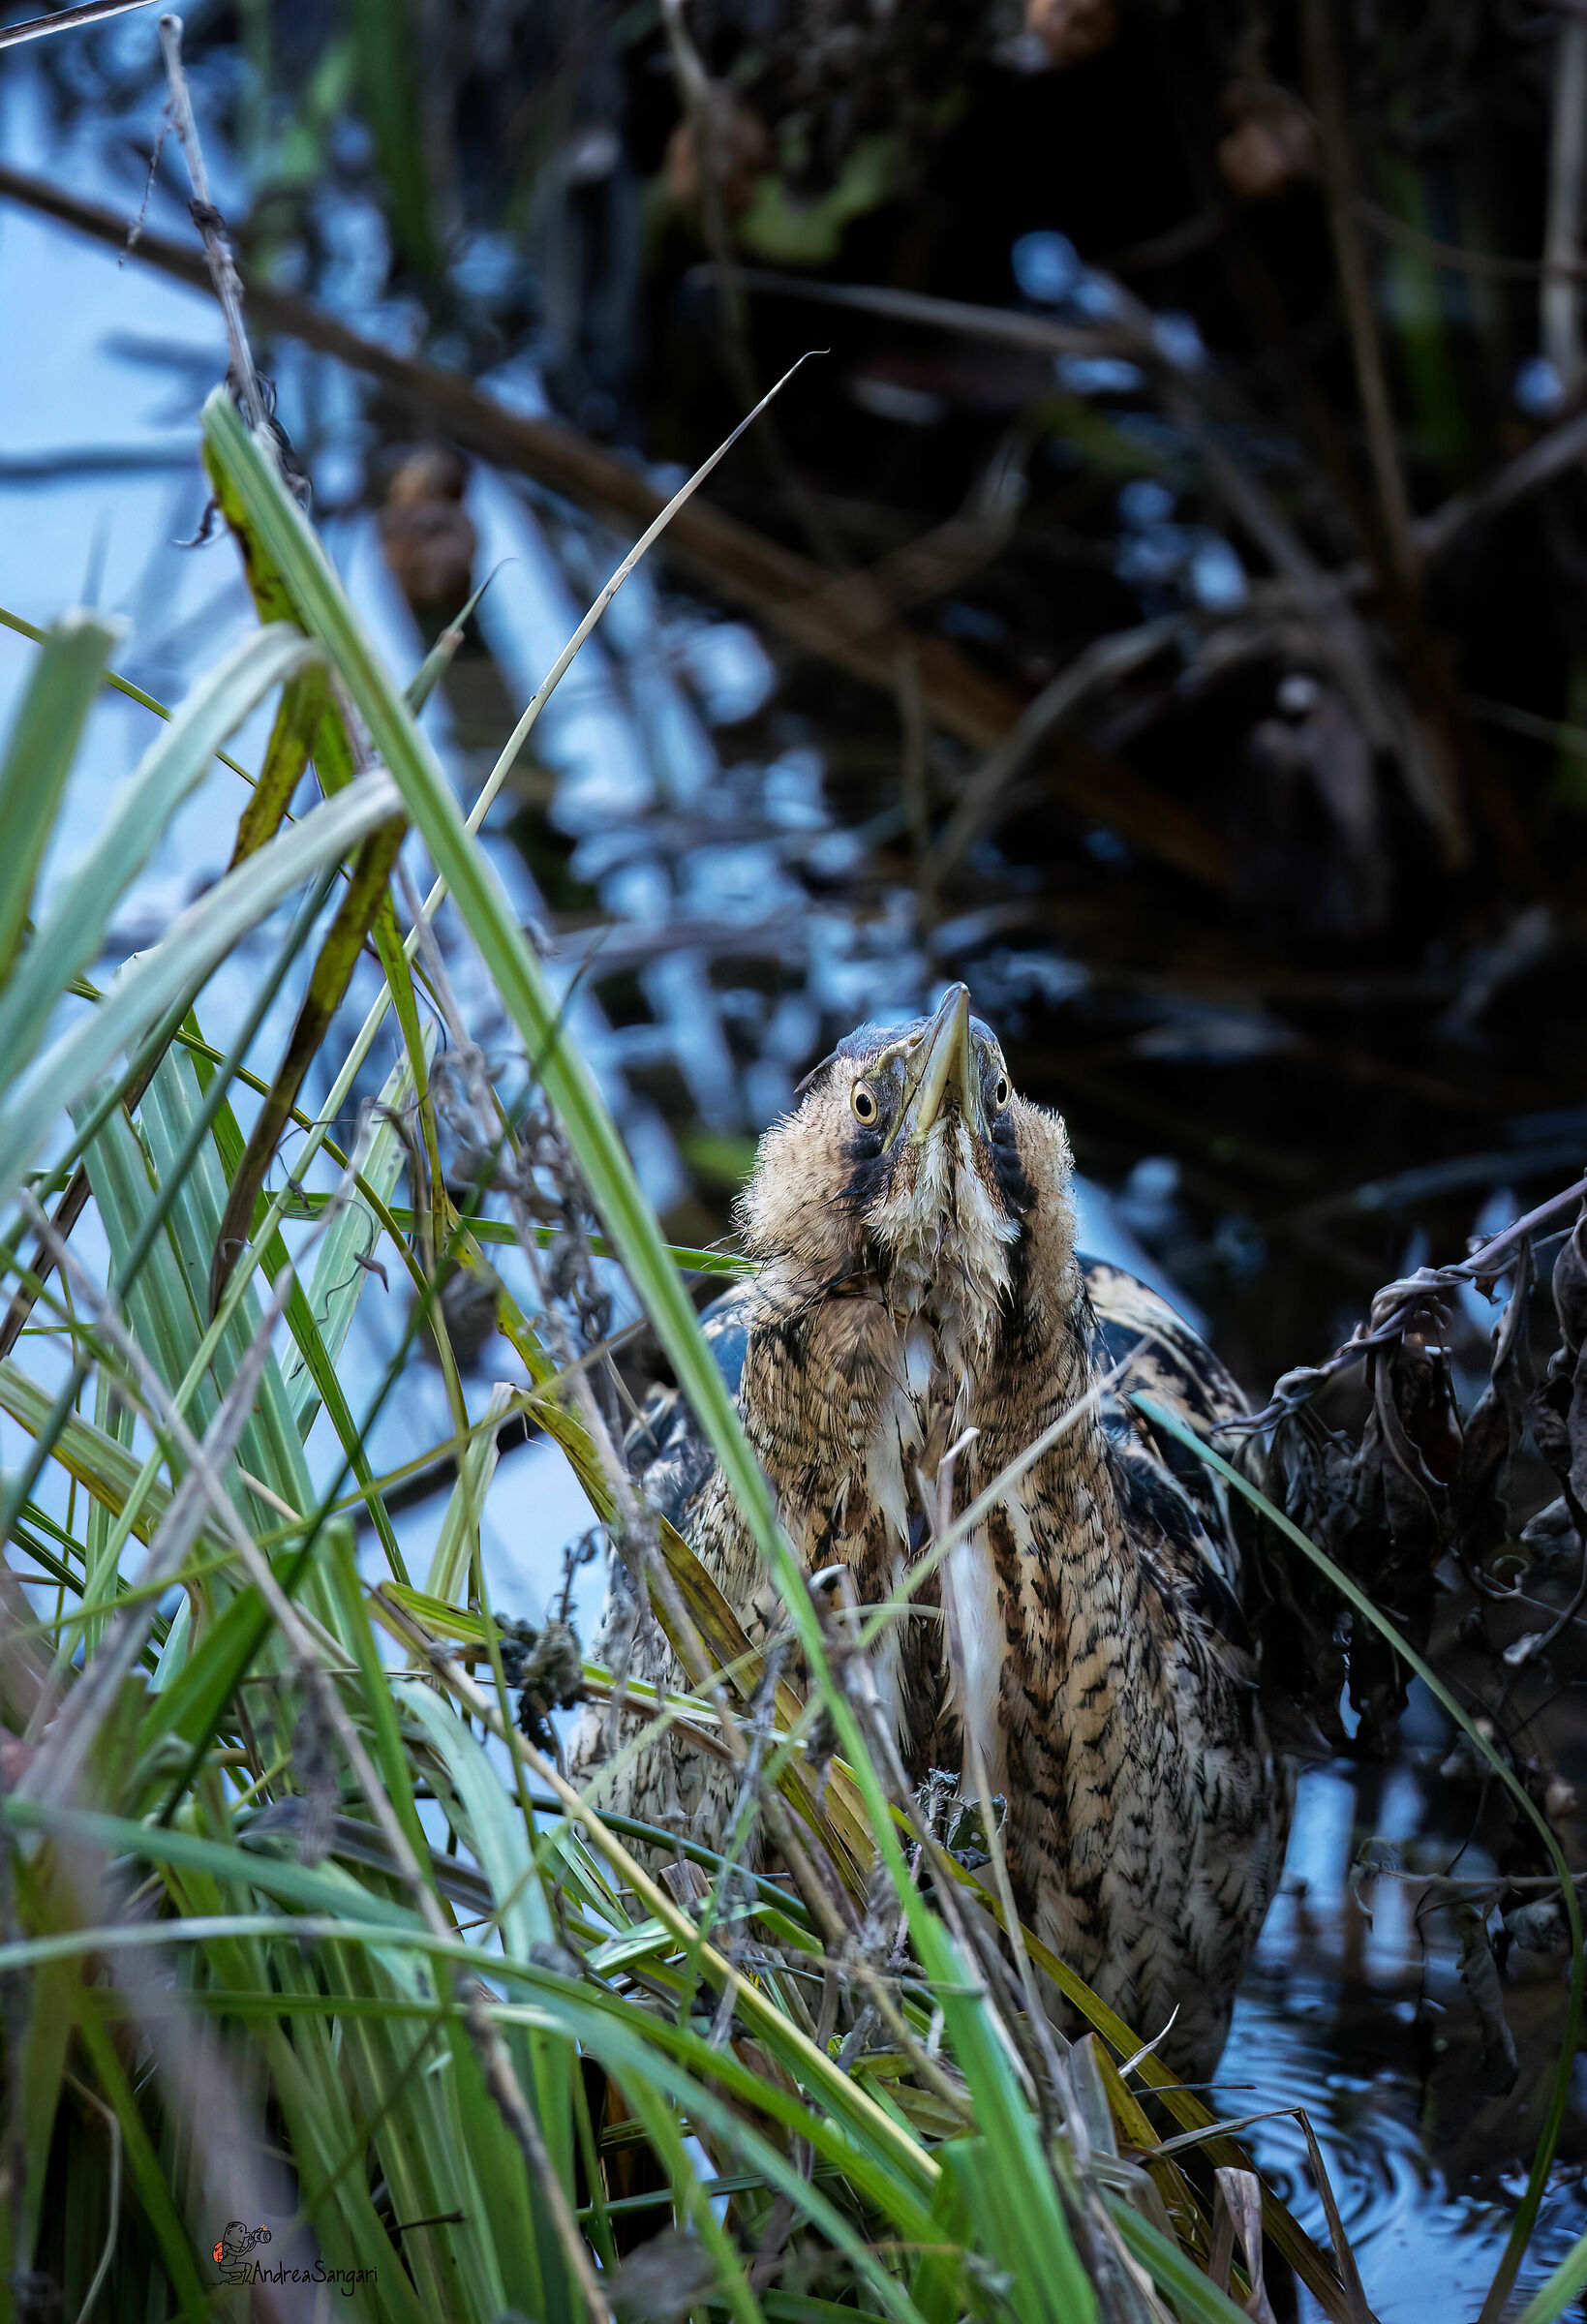 Close encounter with the bittern...